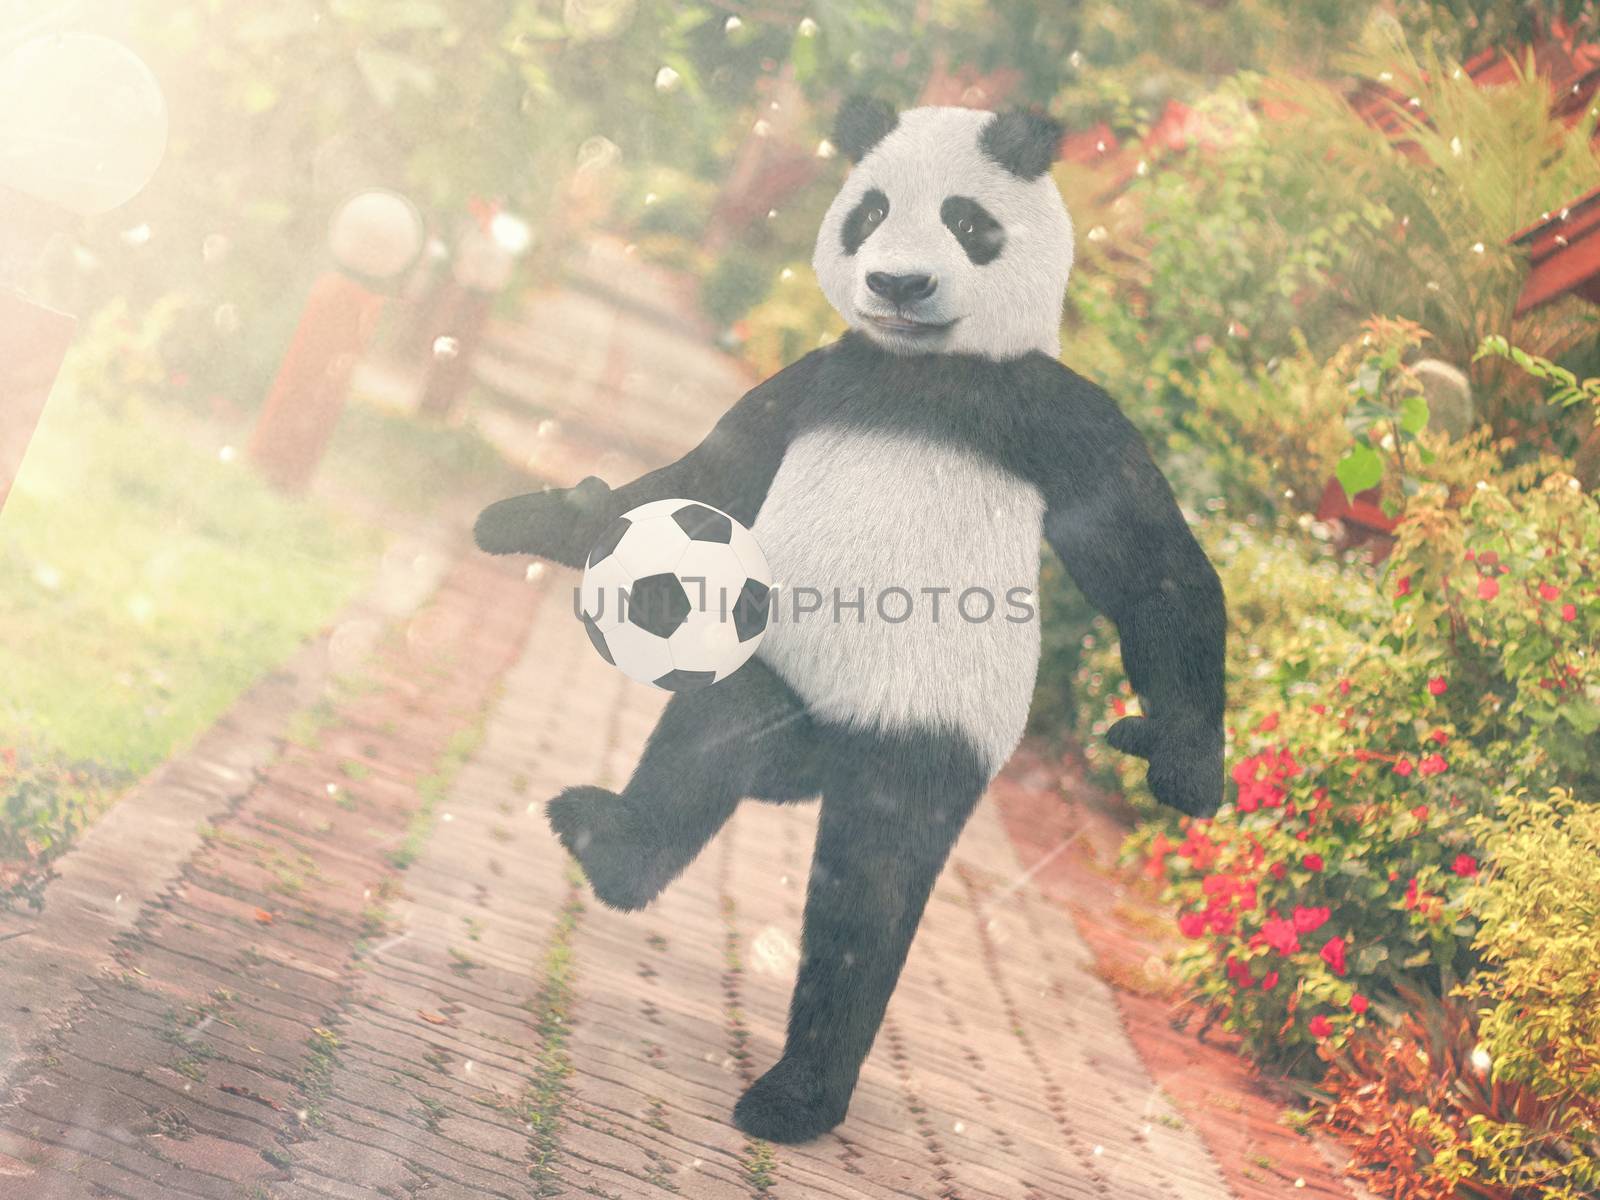 Panda football player. chasing soccer ball foot against backdrop Resort Thailand. juggling ball bear. character background paving stones road stretching into distance. edges with red tropical flowers. by xtate